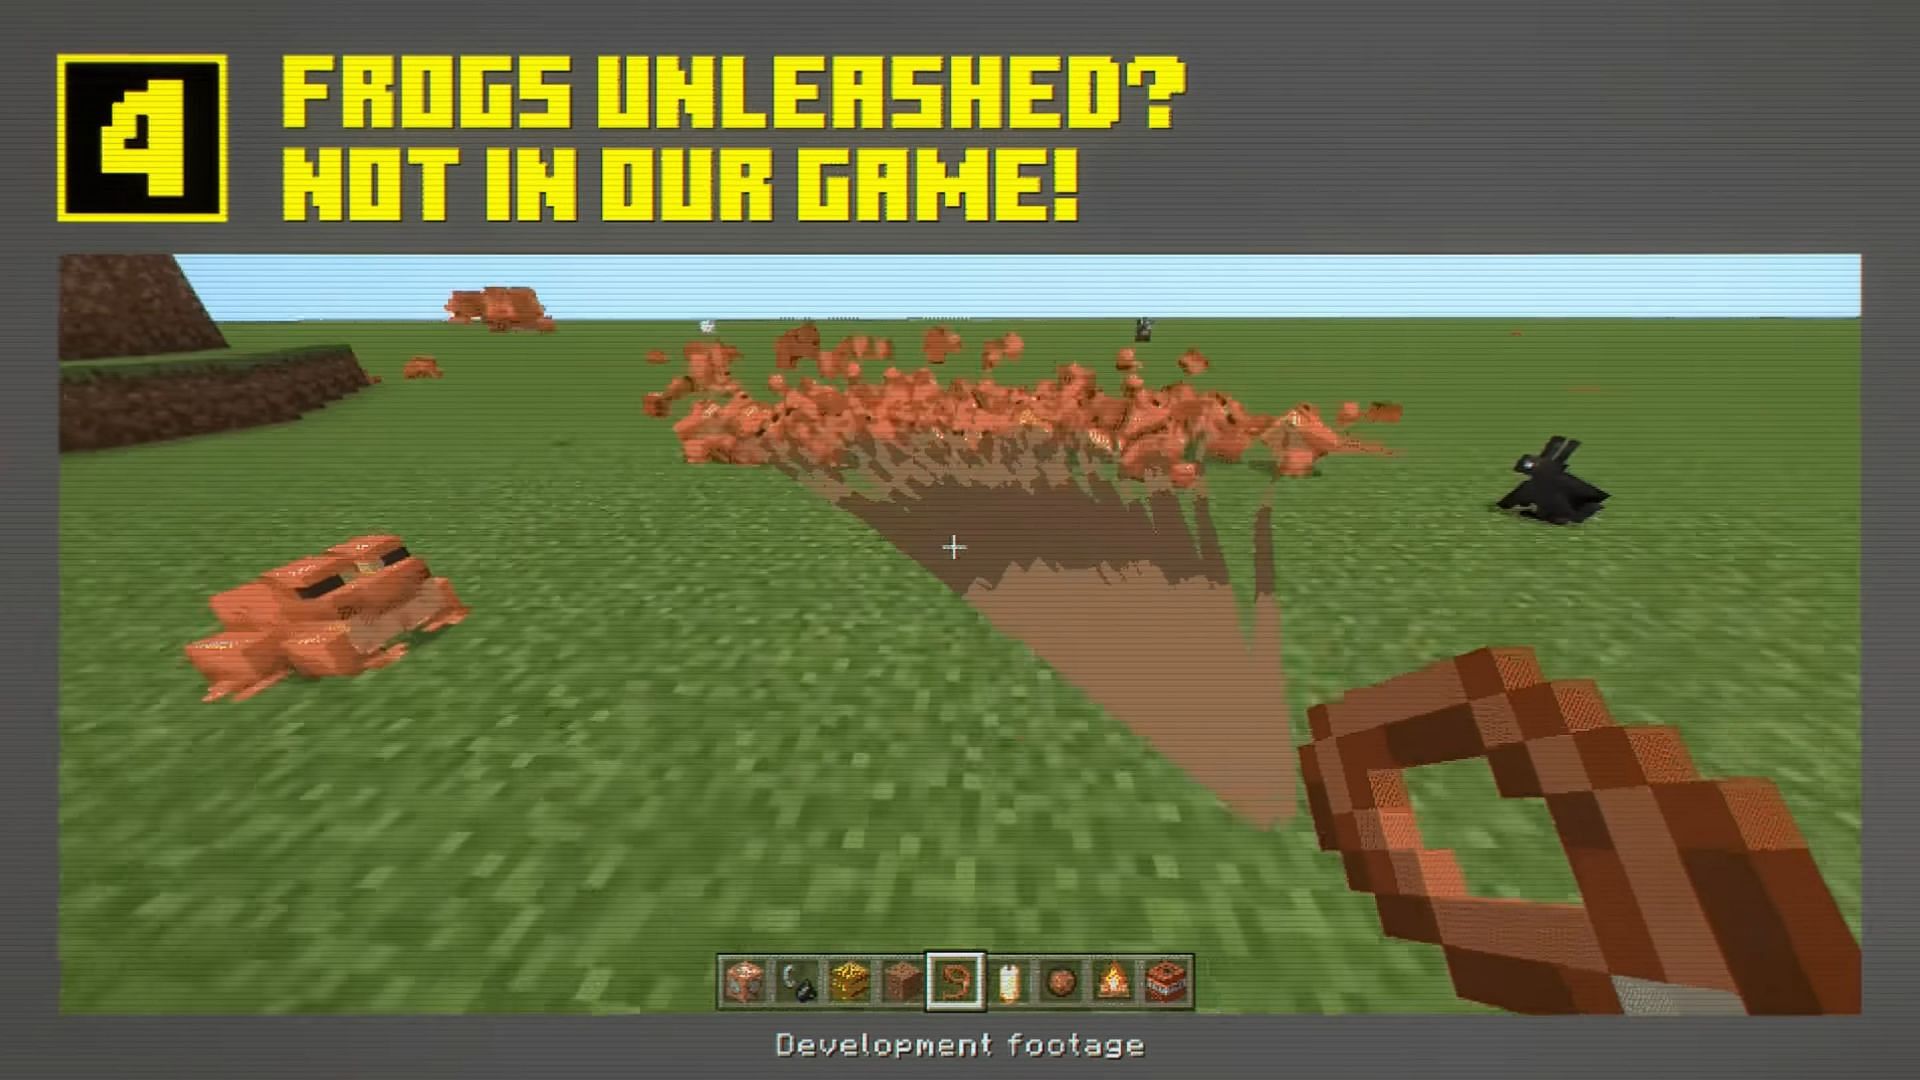 The broken frog walk cycle, as seen in the Minecraft YouTube video (Image via Mojang)